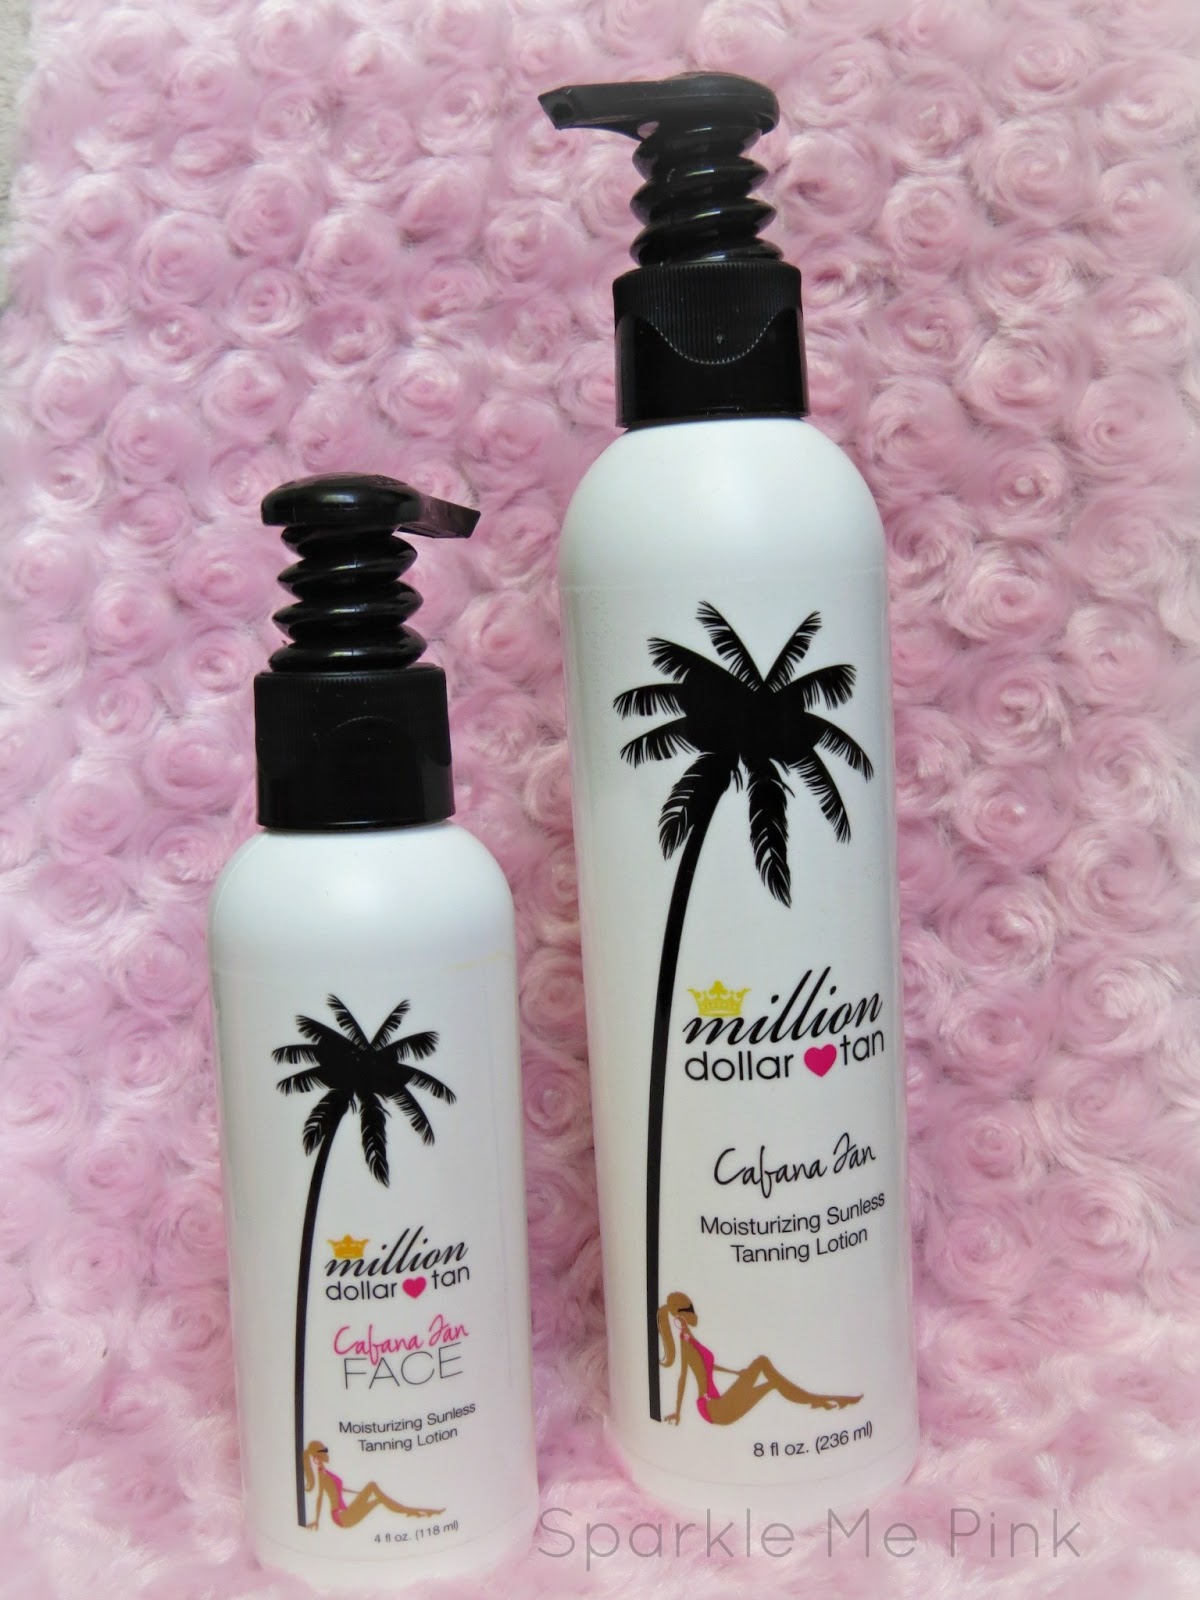 http://www.sparklemepink.com/2013/06/get-naturally-bronzed-skin-without-sun.html